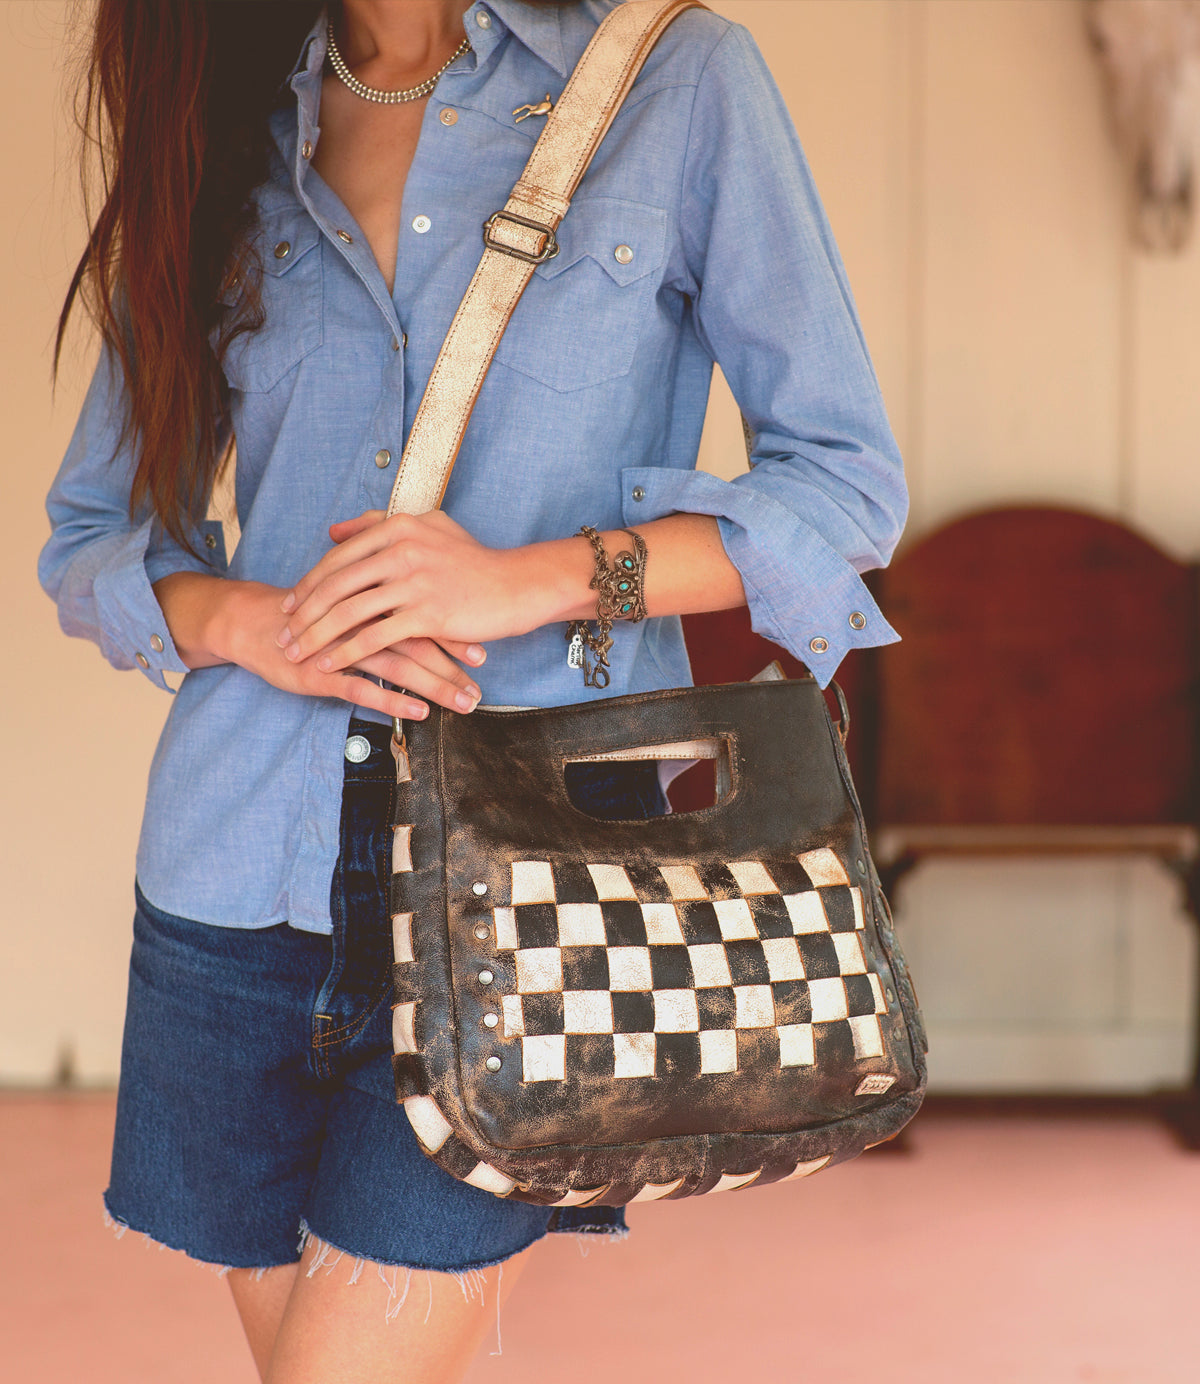 A woman in a denim shirt holding a black and white Bed Stu Orchid purse.